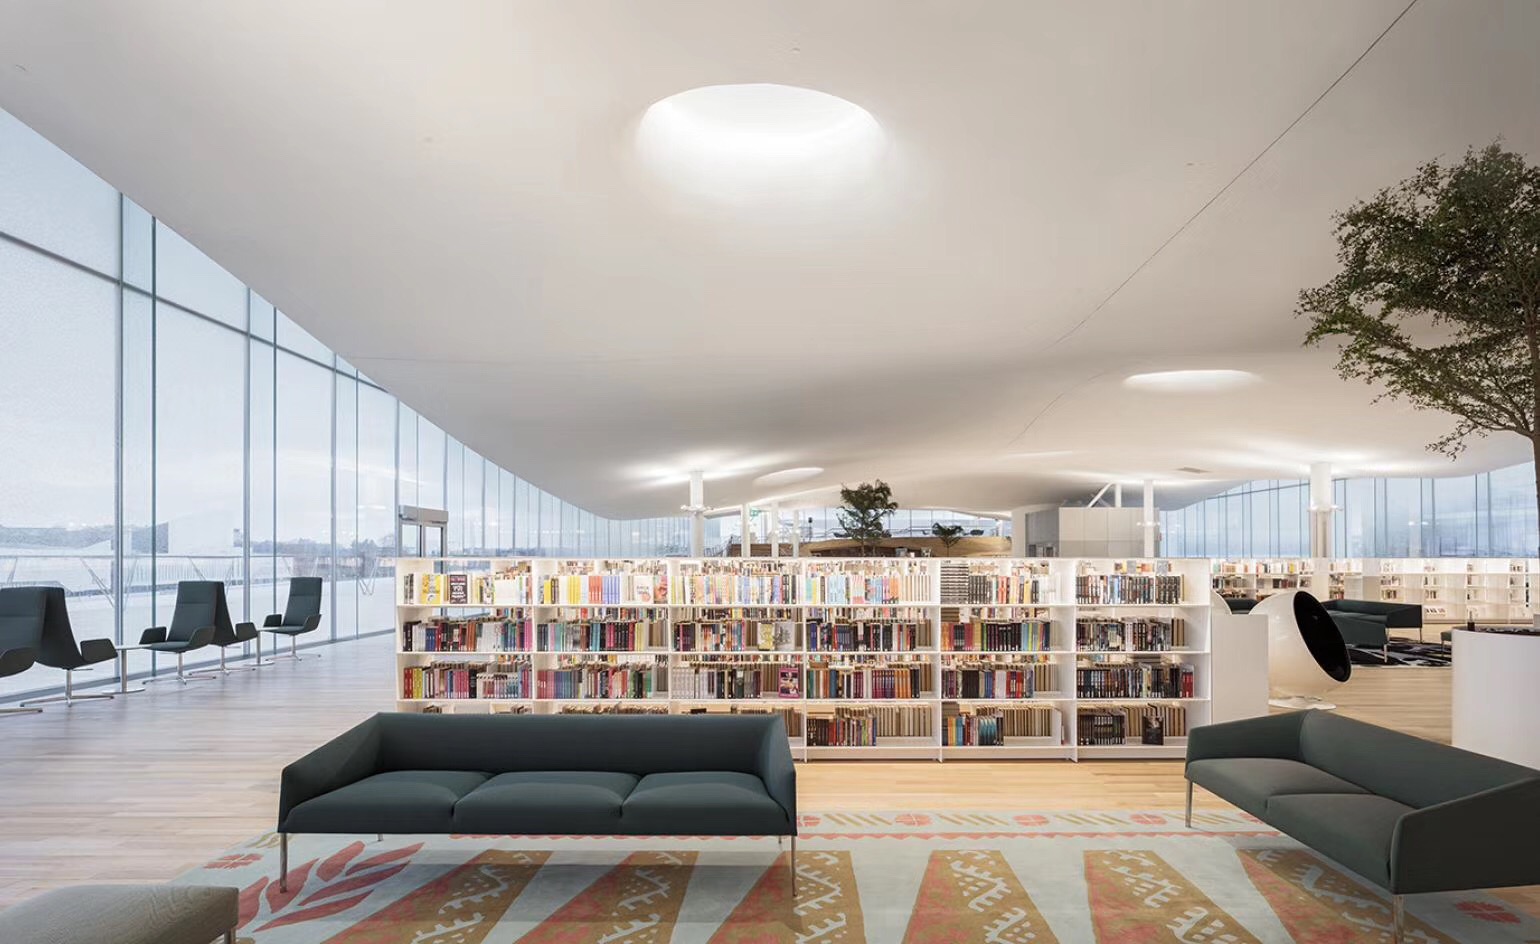 Helsinki opens a light-filled library as a national monument(图1)